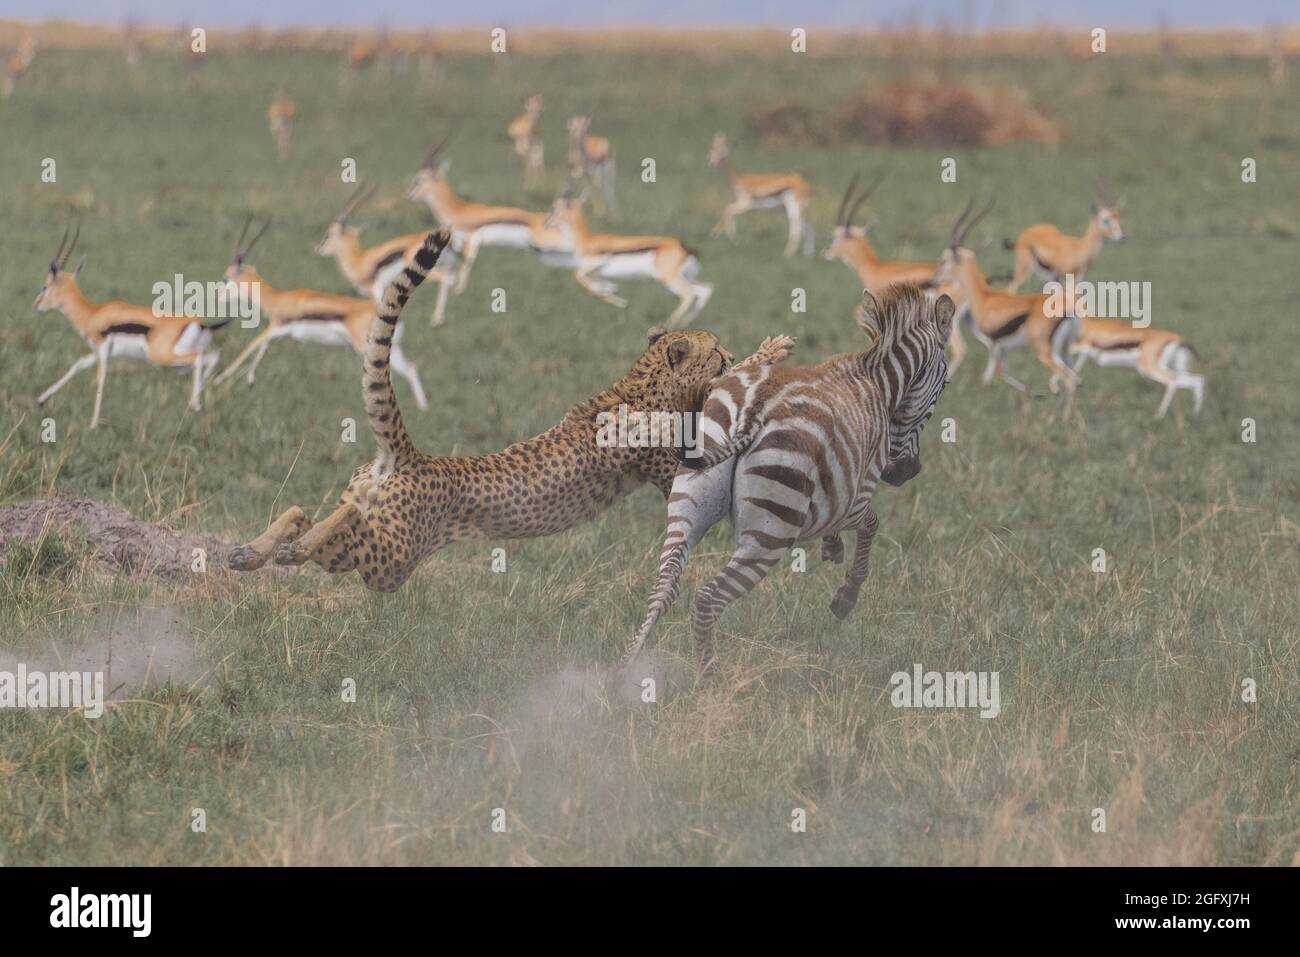 The cheetah leapt onto the zebra's rear. MAASAI MARA, KENYA: THRILLING photographs have captured the moment a coalition of cheetahs chased down and fe Stock Photo